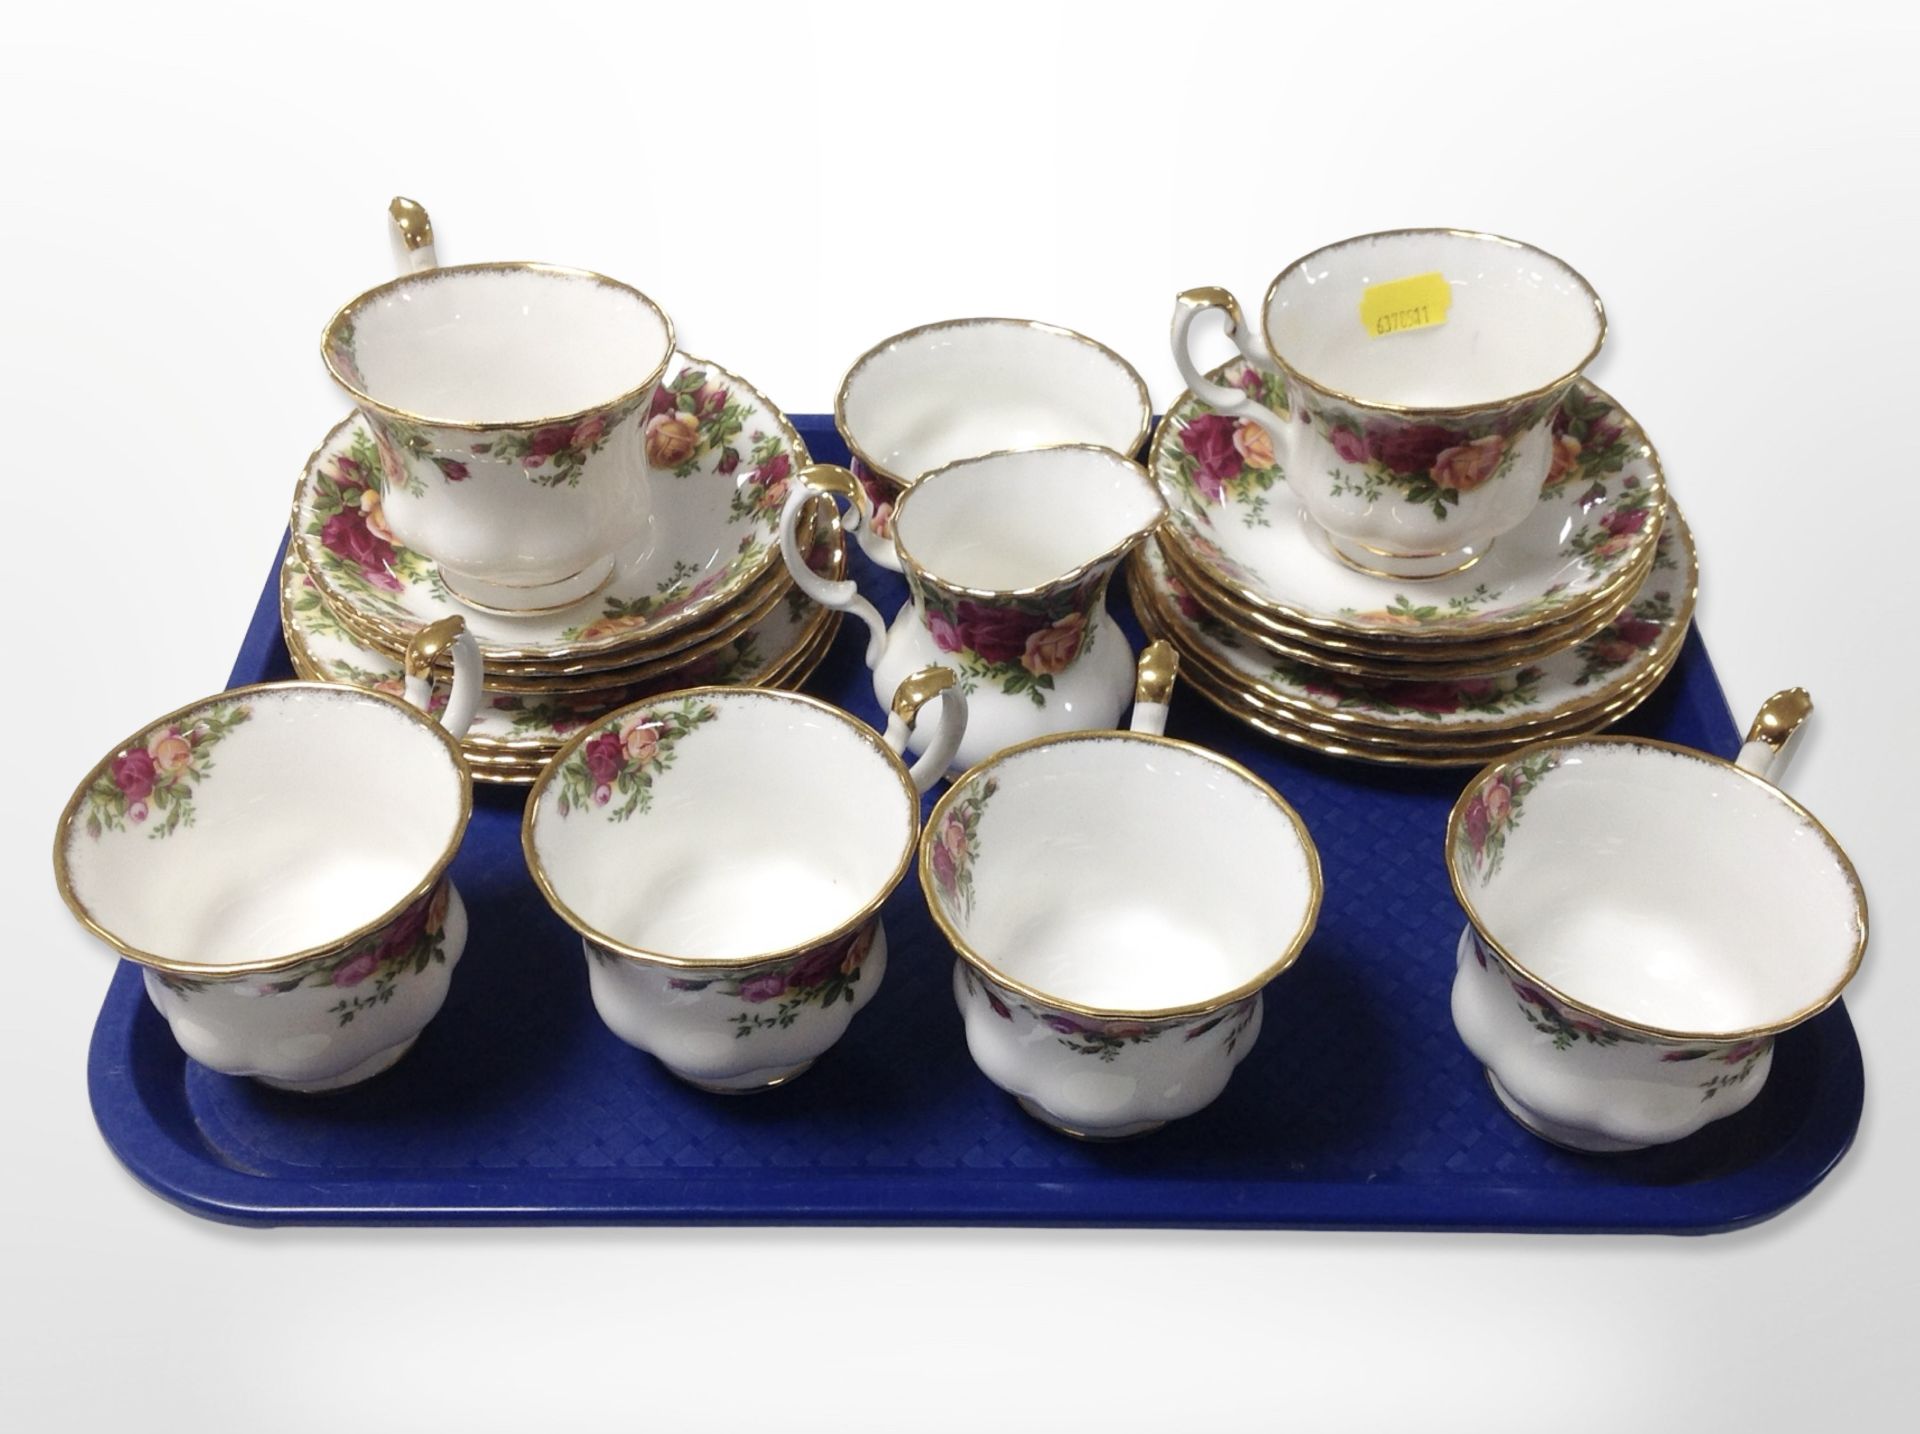 20 pieces of Royal Albert Old Country Roses tea china.